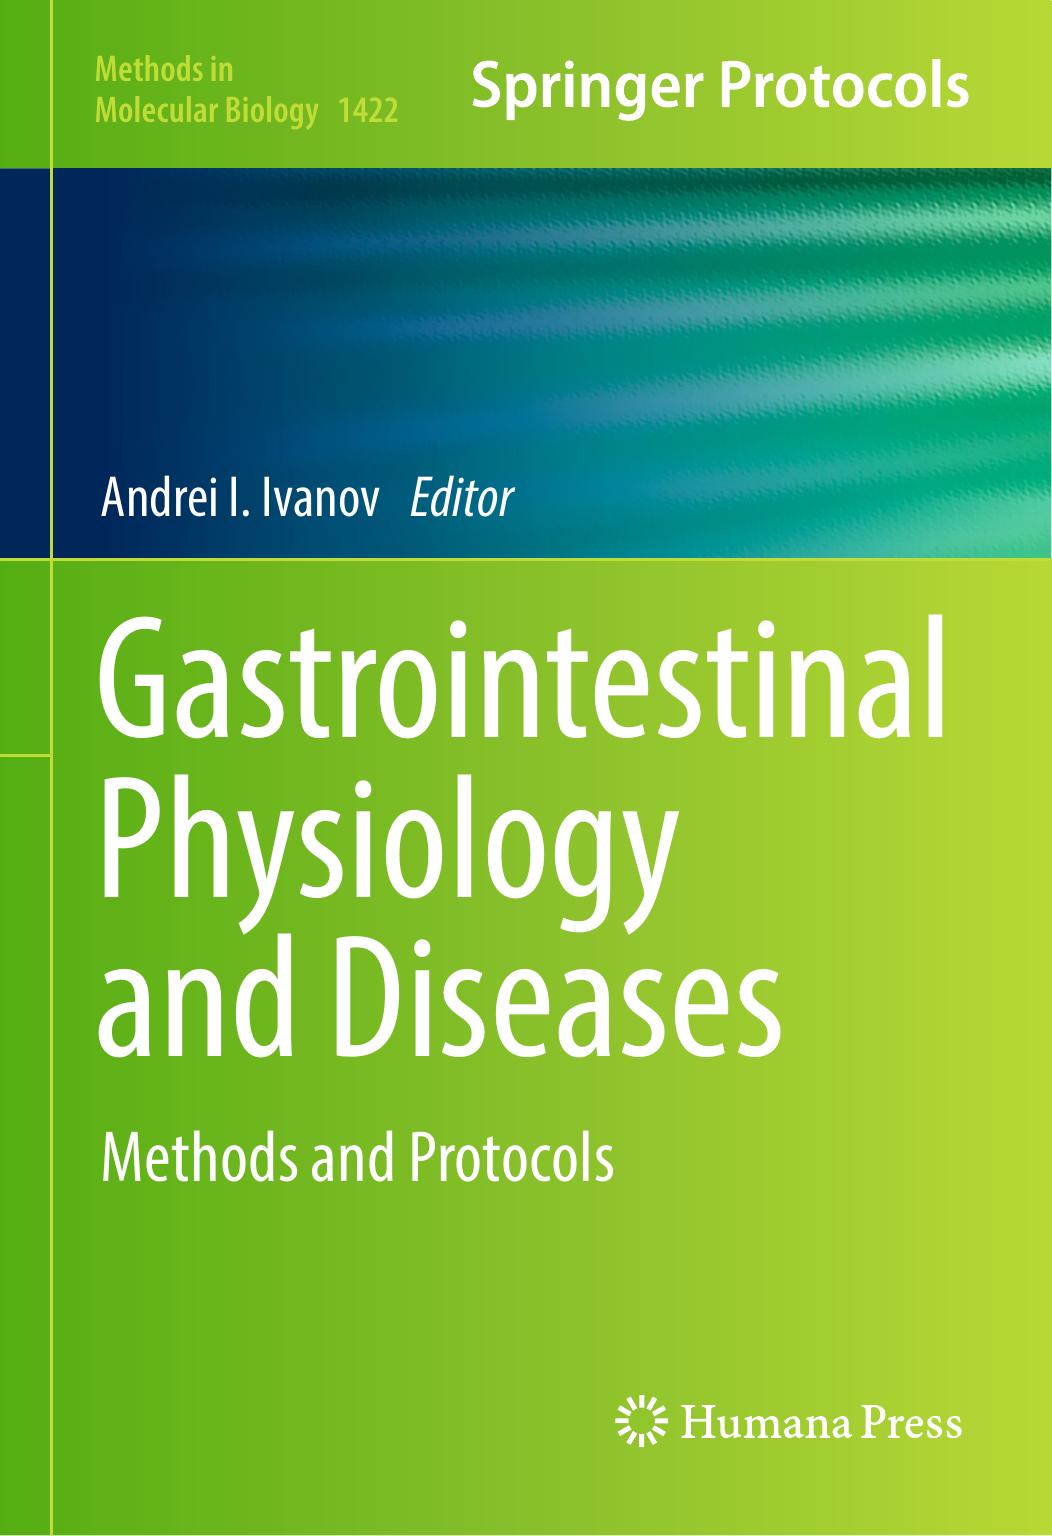 Gastrointestinal Physiology and Diseases Methods and Protocols 2016